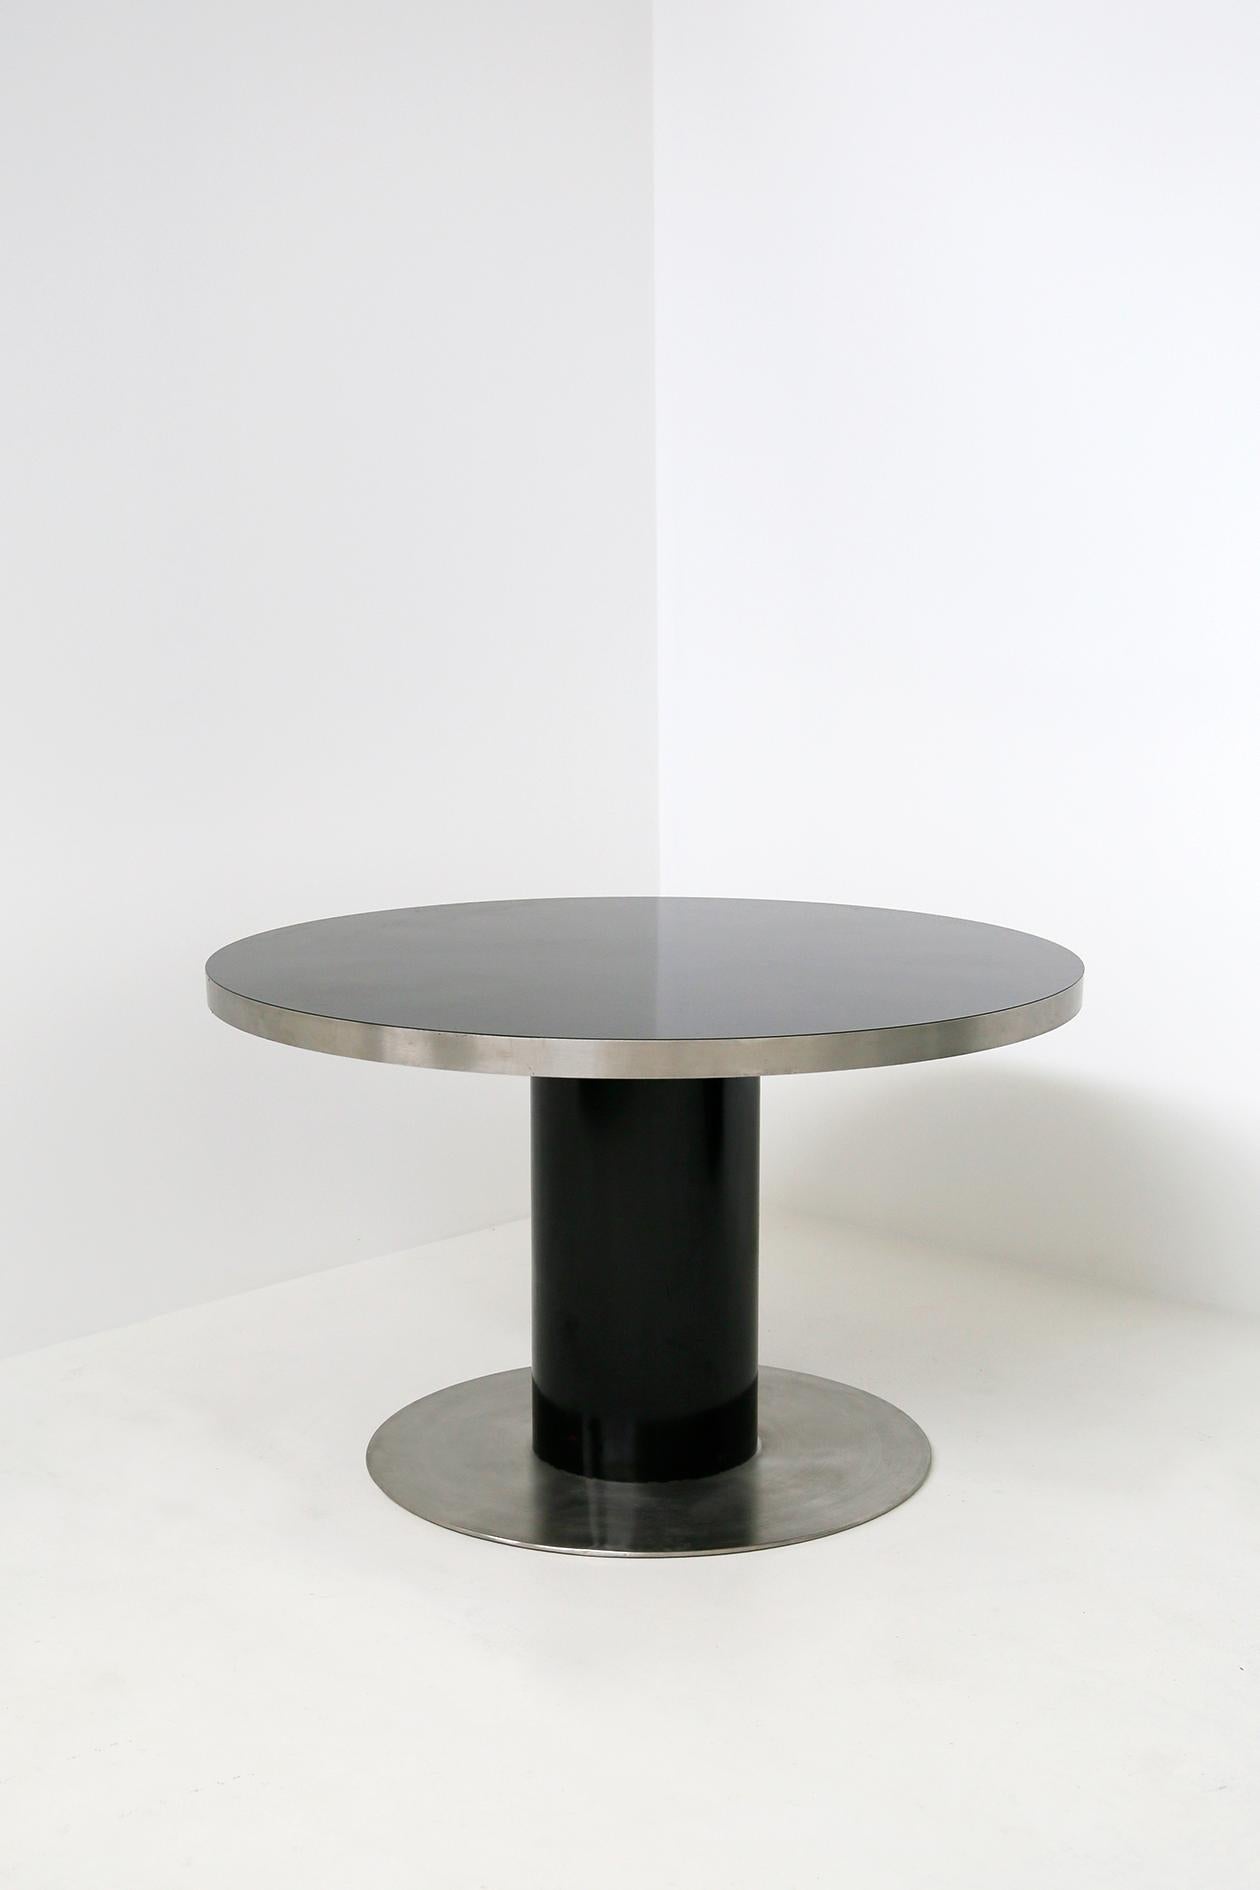 Italian Pedestal Round Table by Willy Rizzo in Steel and Wood Black, 1970s 2